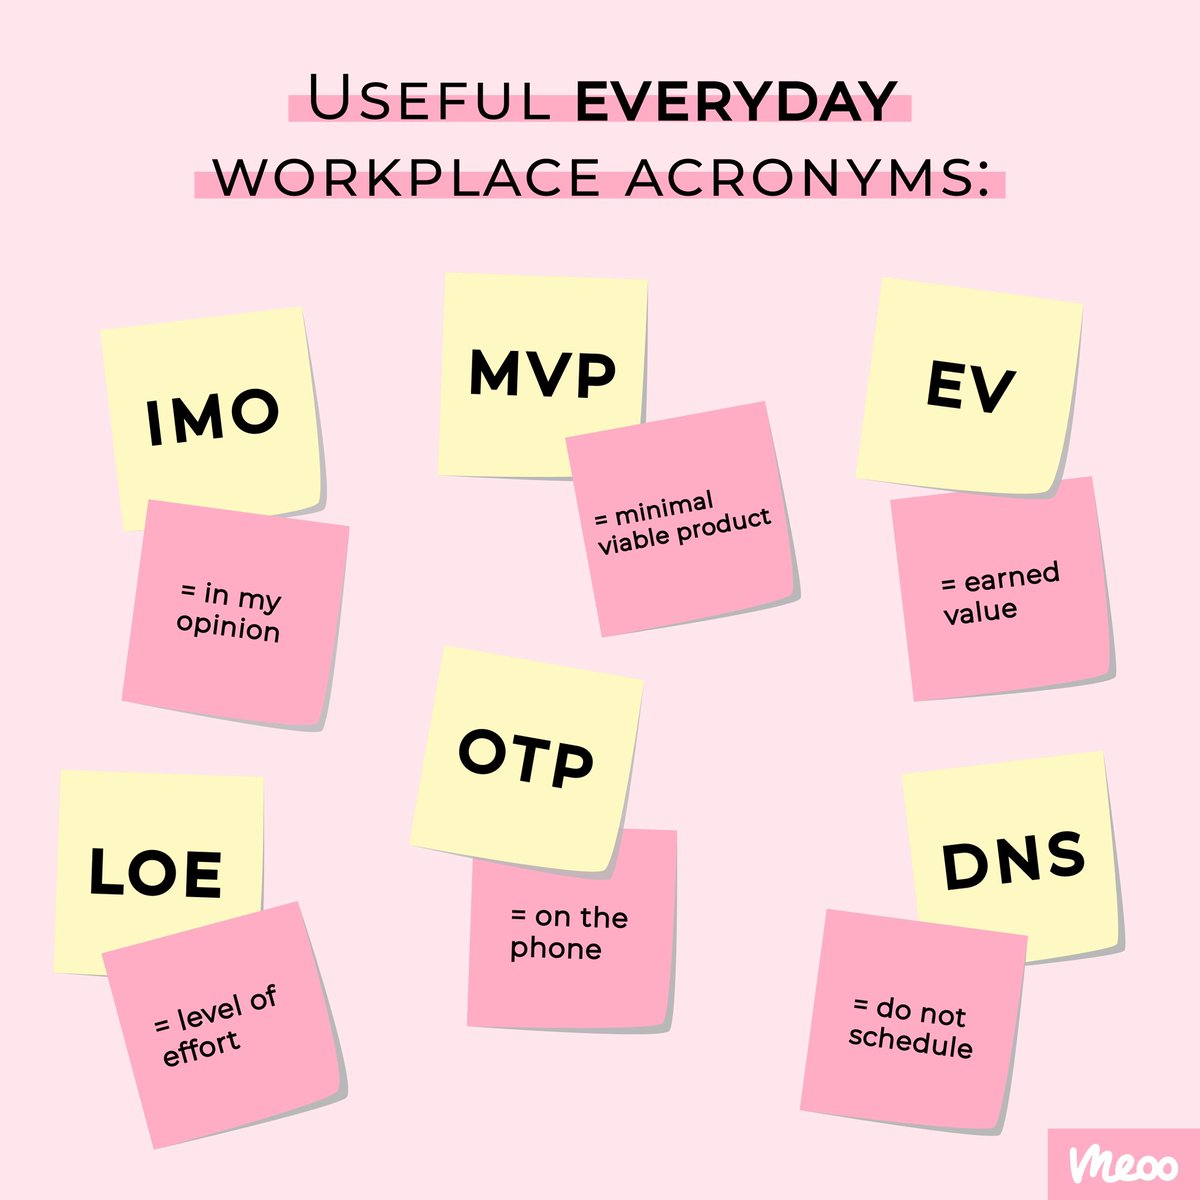 Happy Friday 🎉

#askmeoo #searchengine #techstartup #acronyms #learnontwitter #usefulacronyms #studynotes #sharingknowledge